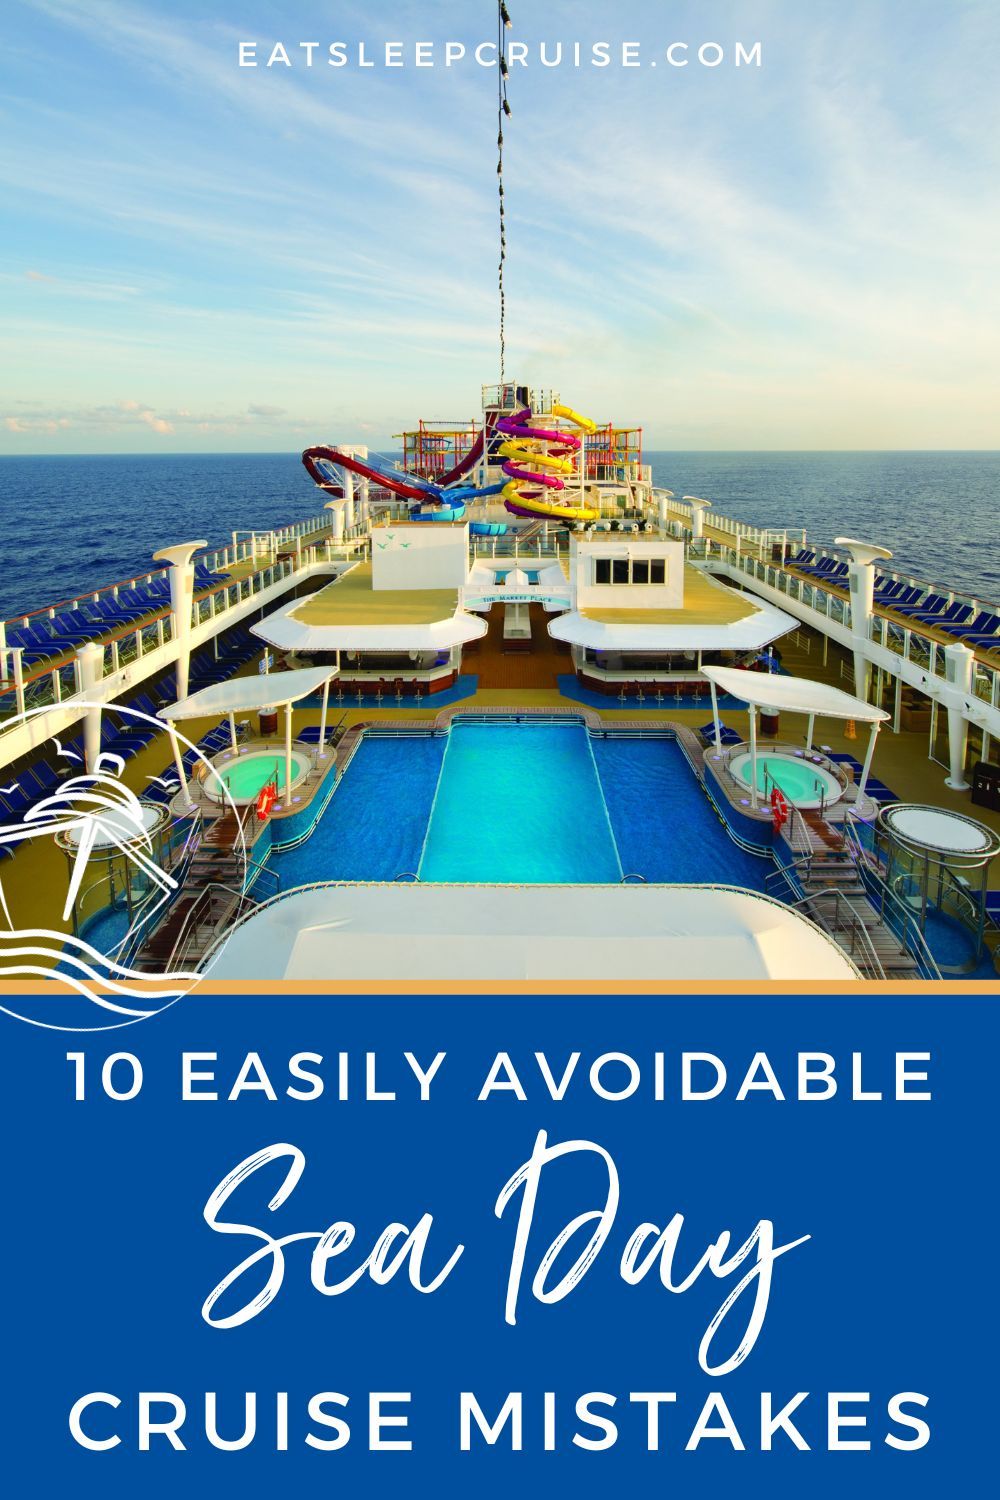 Easily Avoidable Sea Day Mistakes on Your Next Cruise